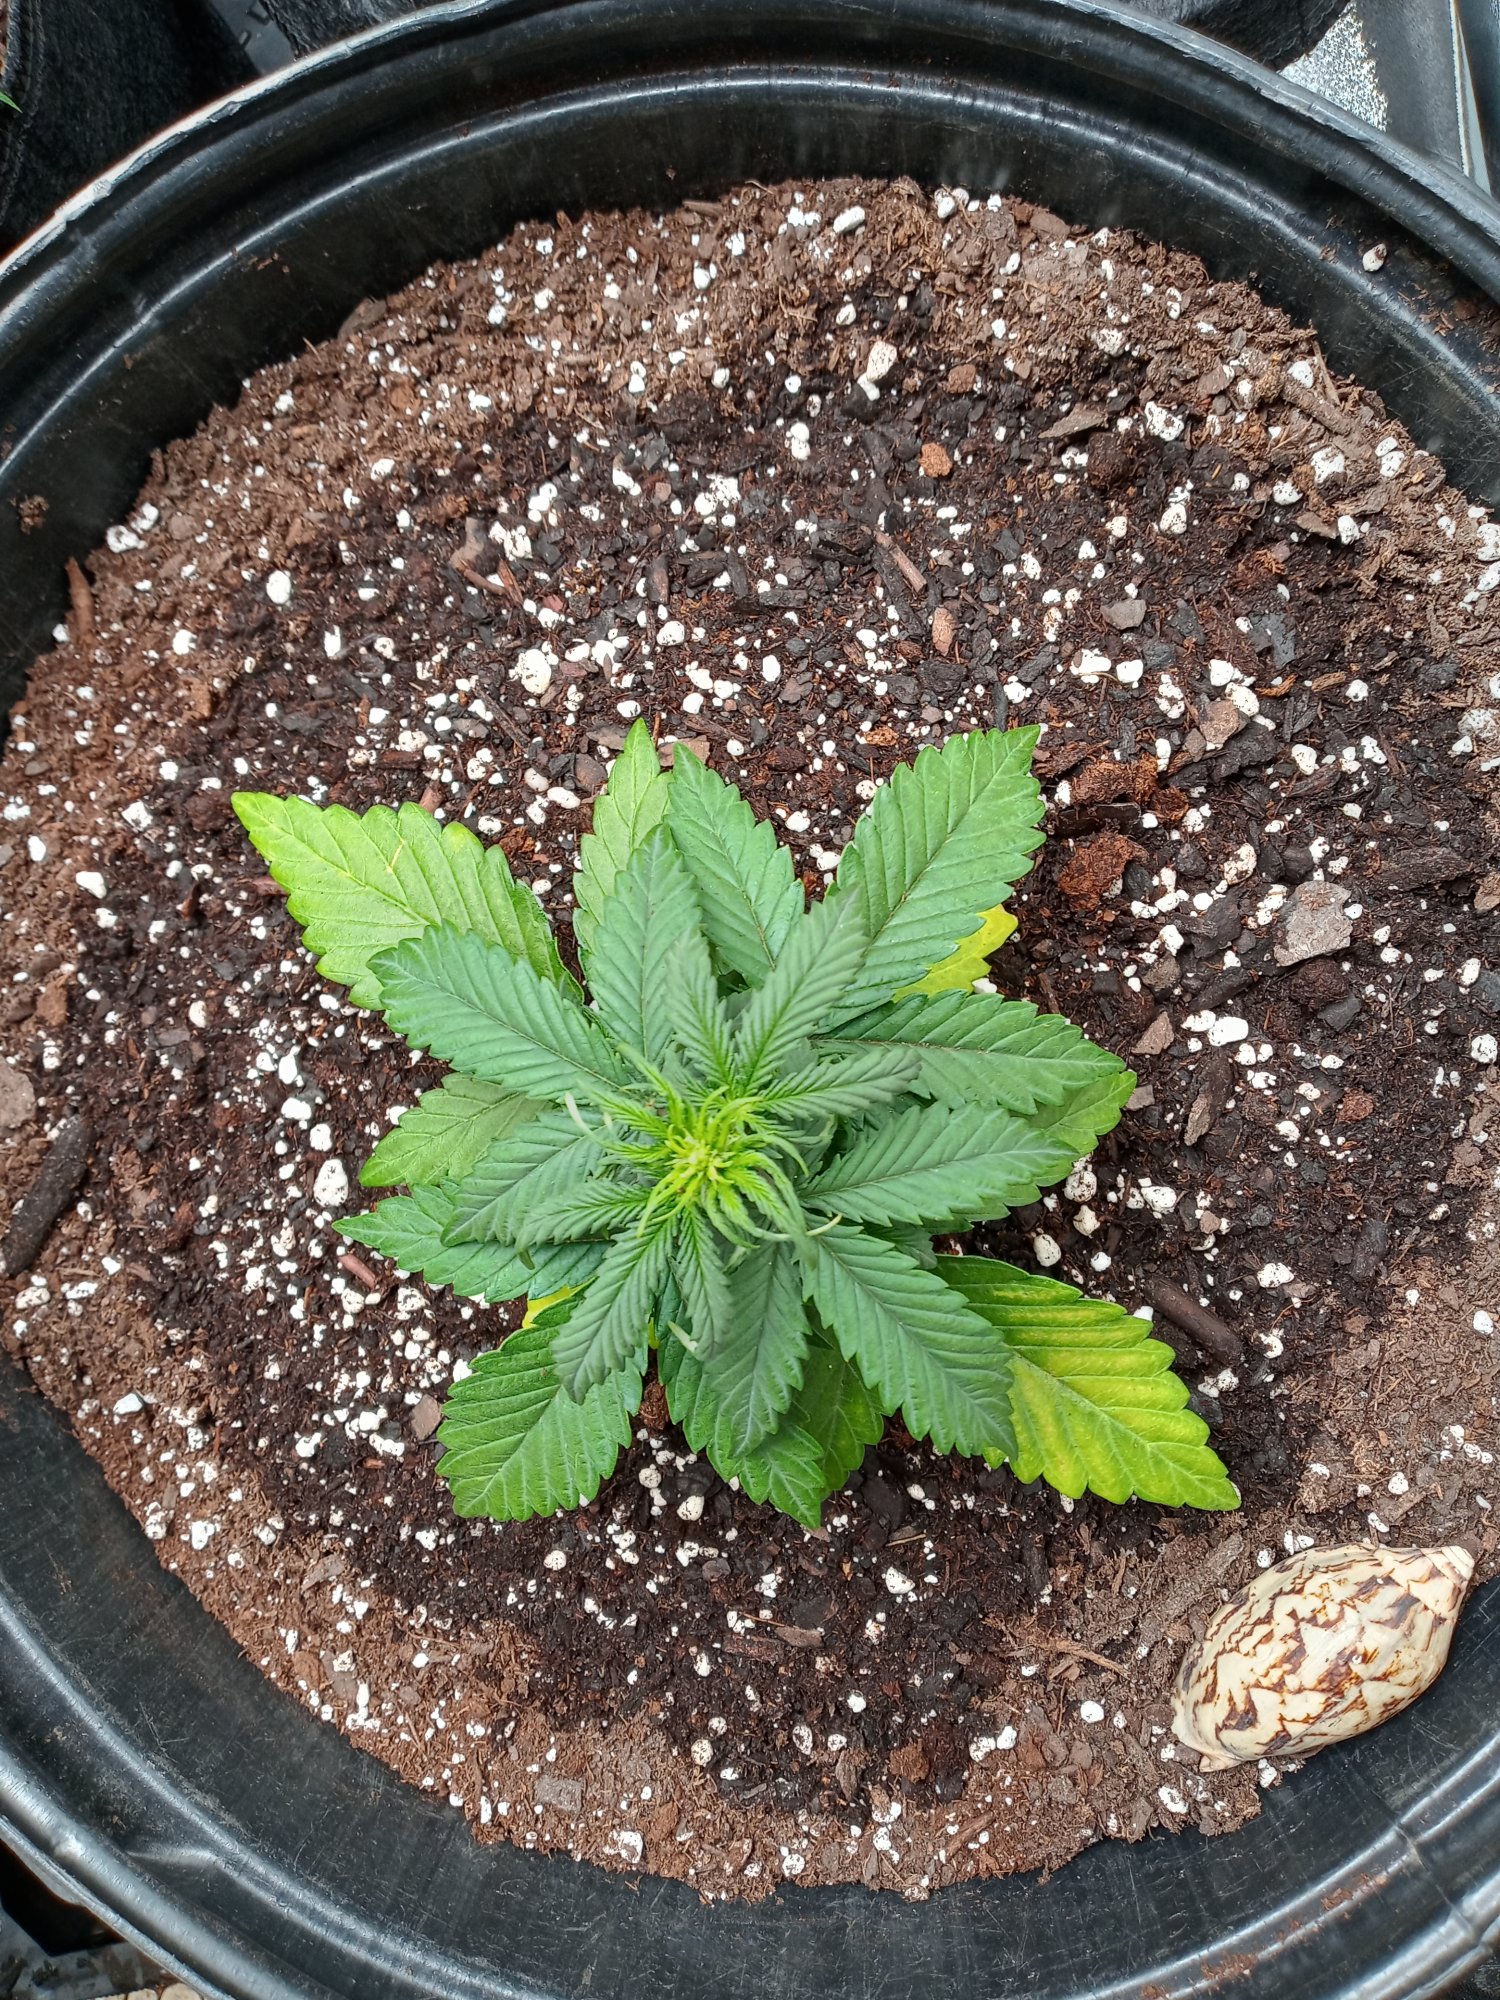 New to autos indoor and dwc trying a lil of each lolhows my grow 9